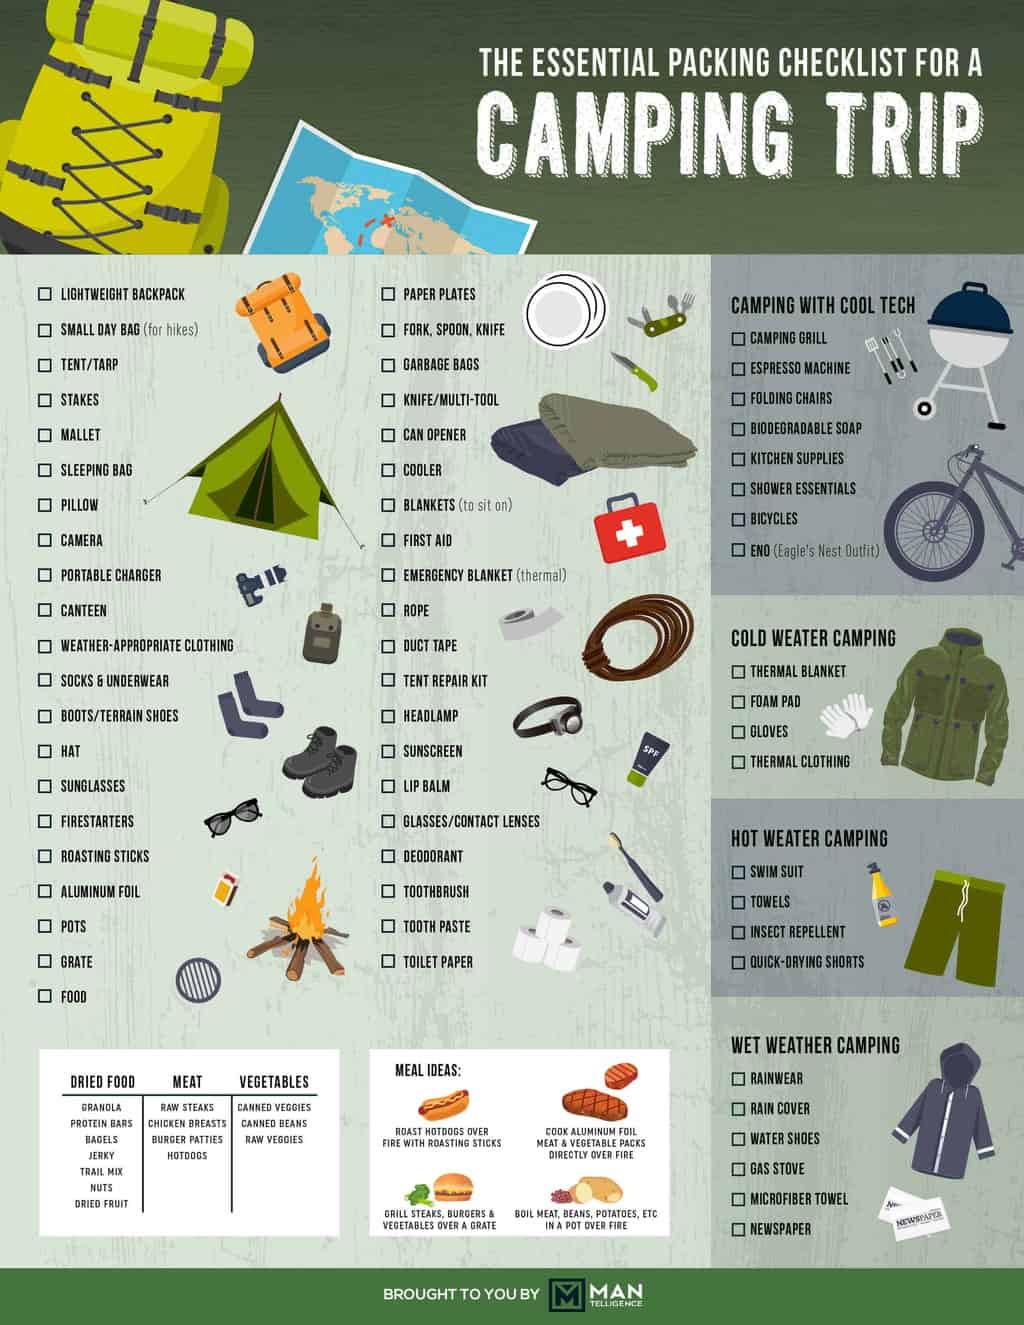 16+ What Are The Essentials For Camping